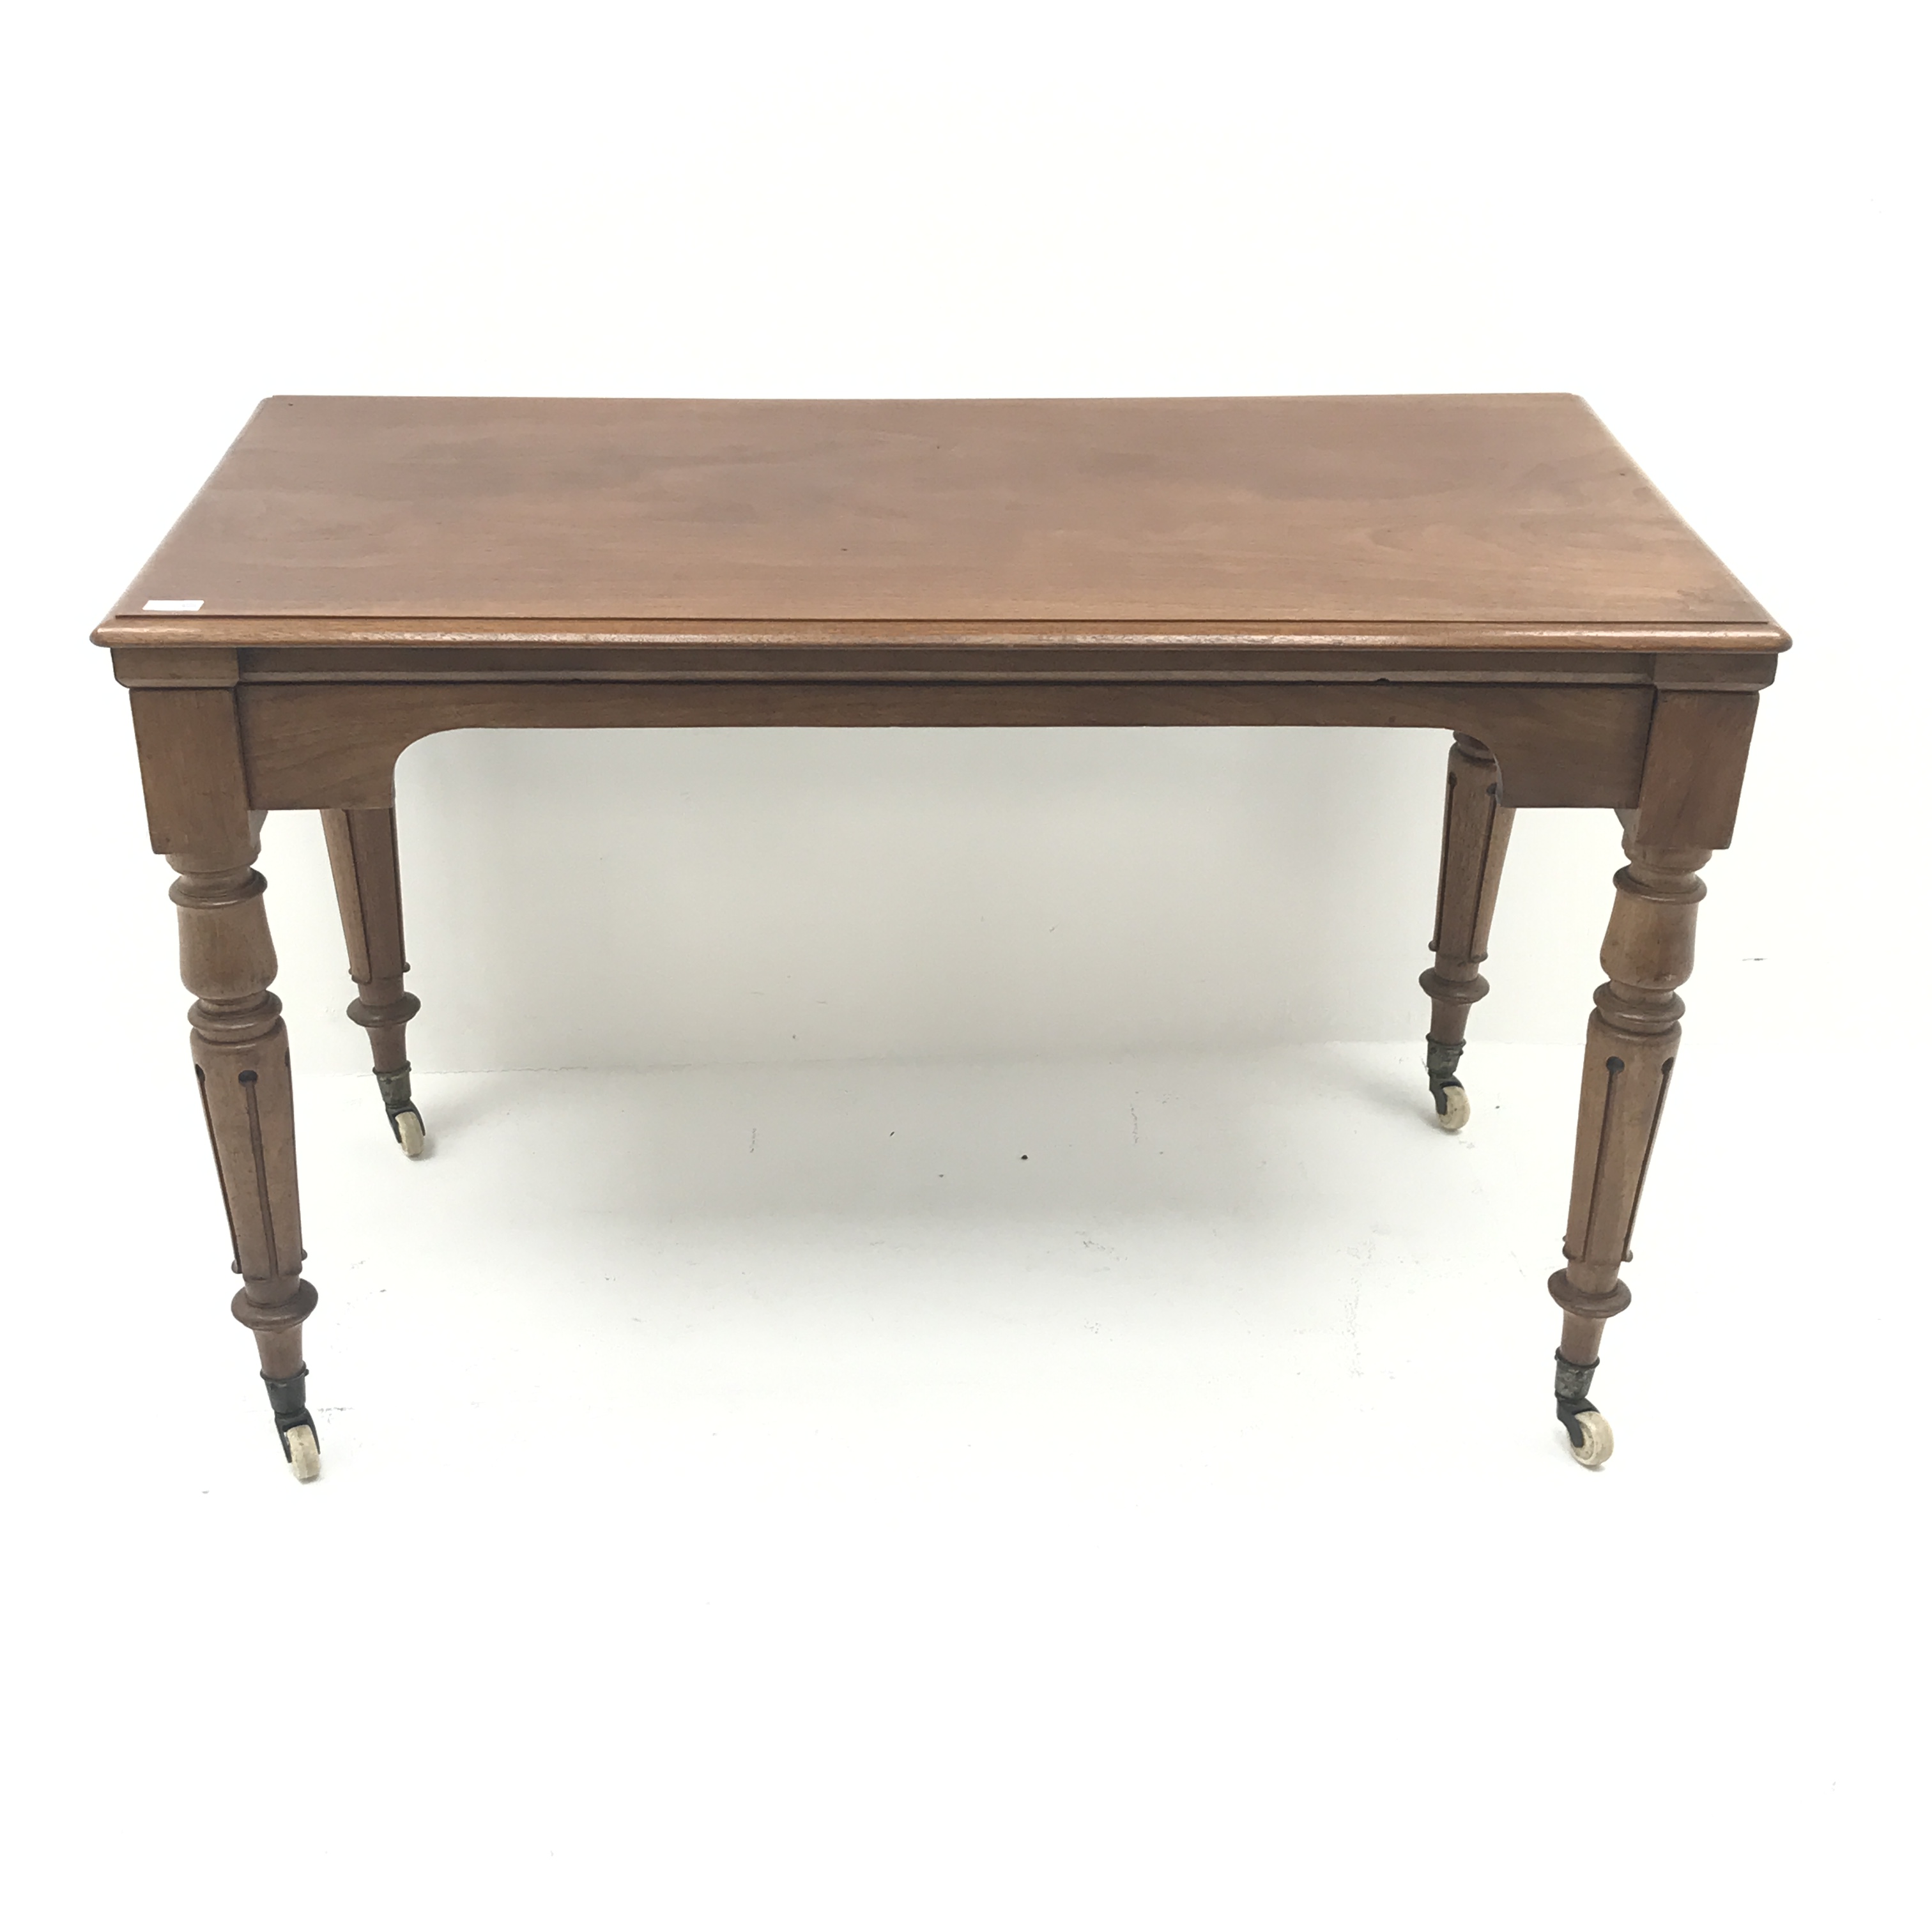 Victorian mahogany and walnut library table, moulded top, - Image 2 of 3